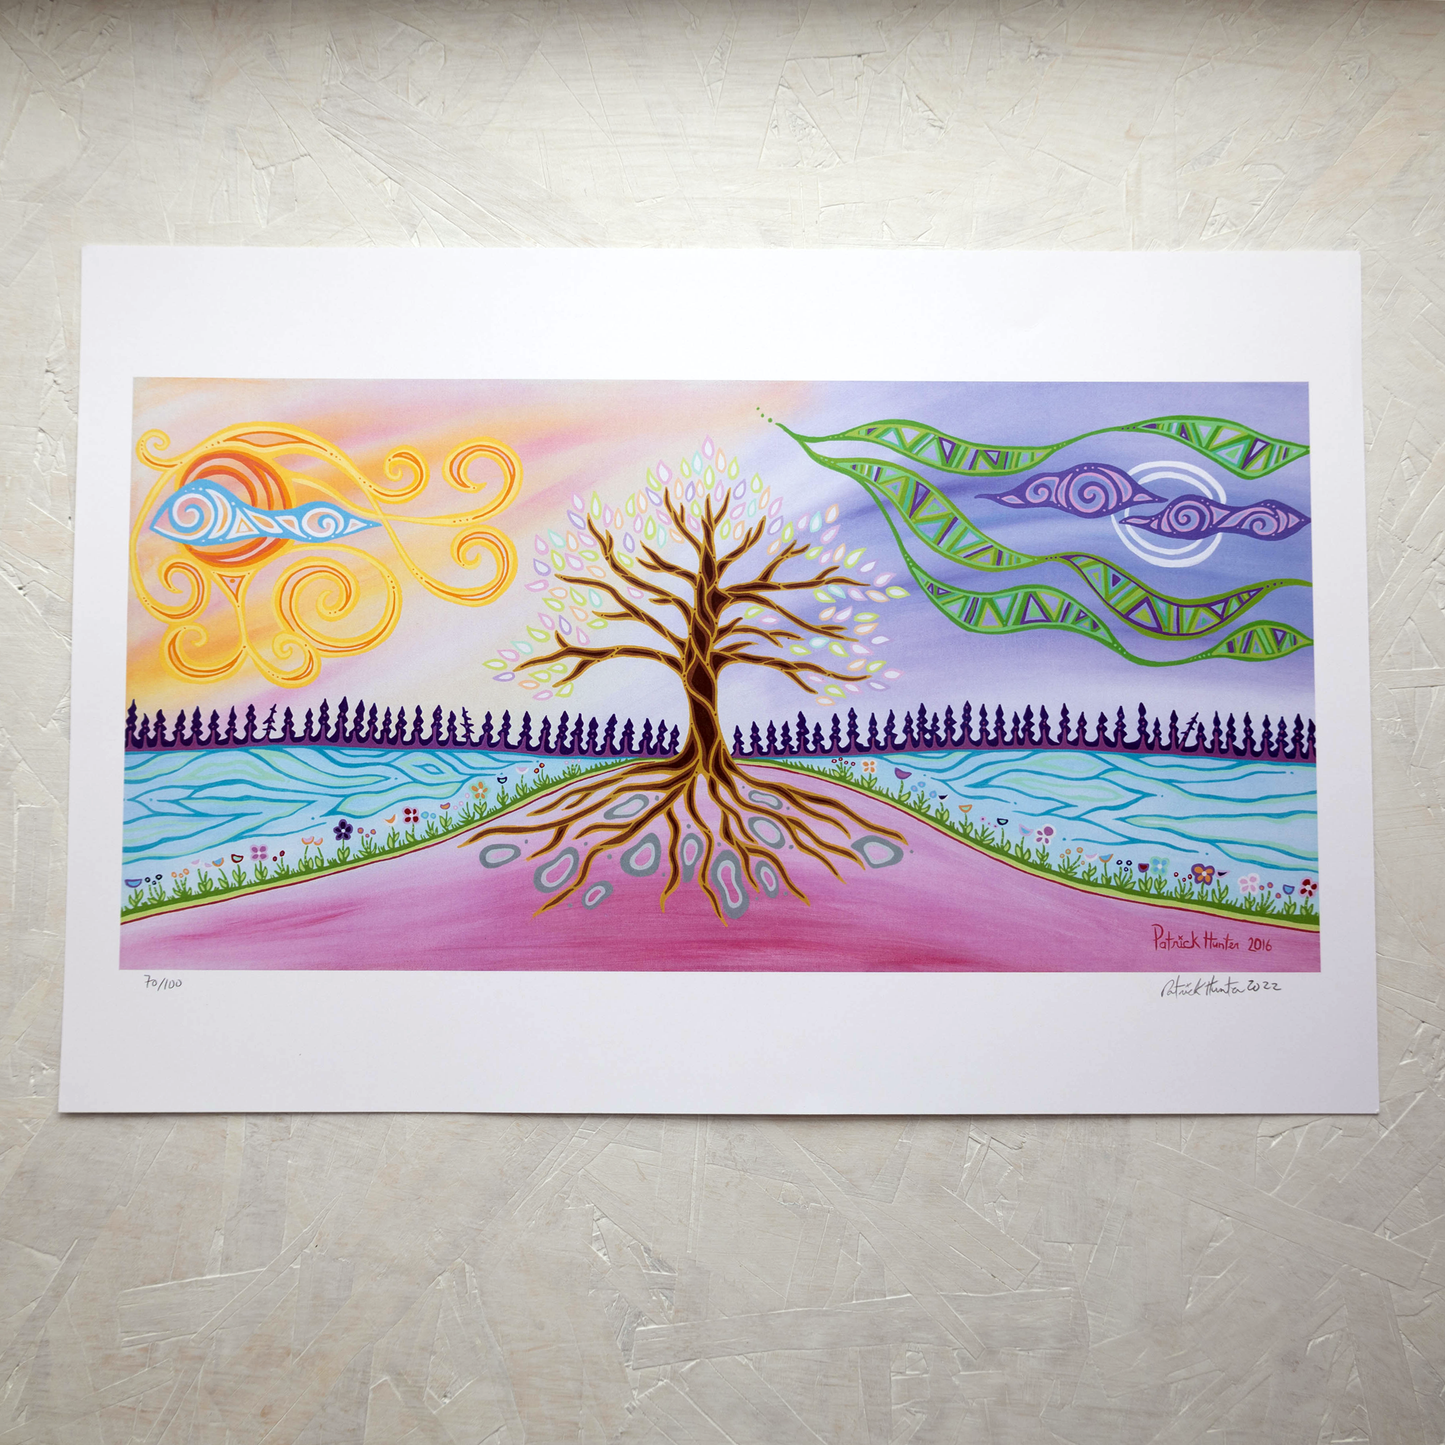 Print of Patrick Hunter's painting of sun, moon, water, land, and tree in woodland art style.